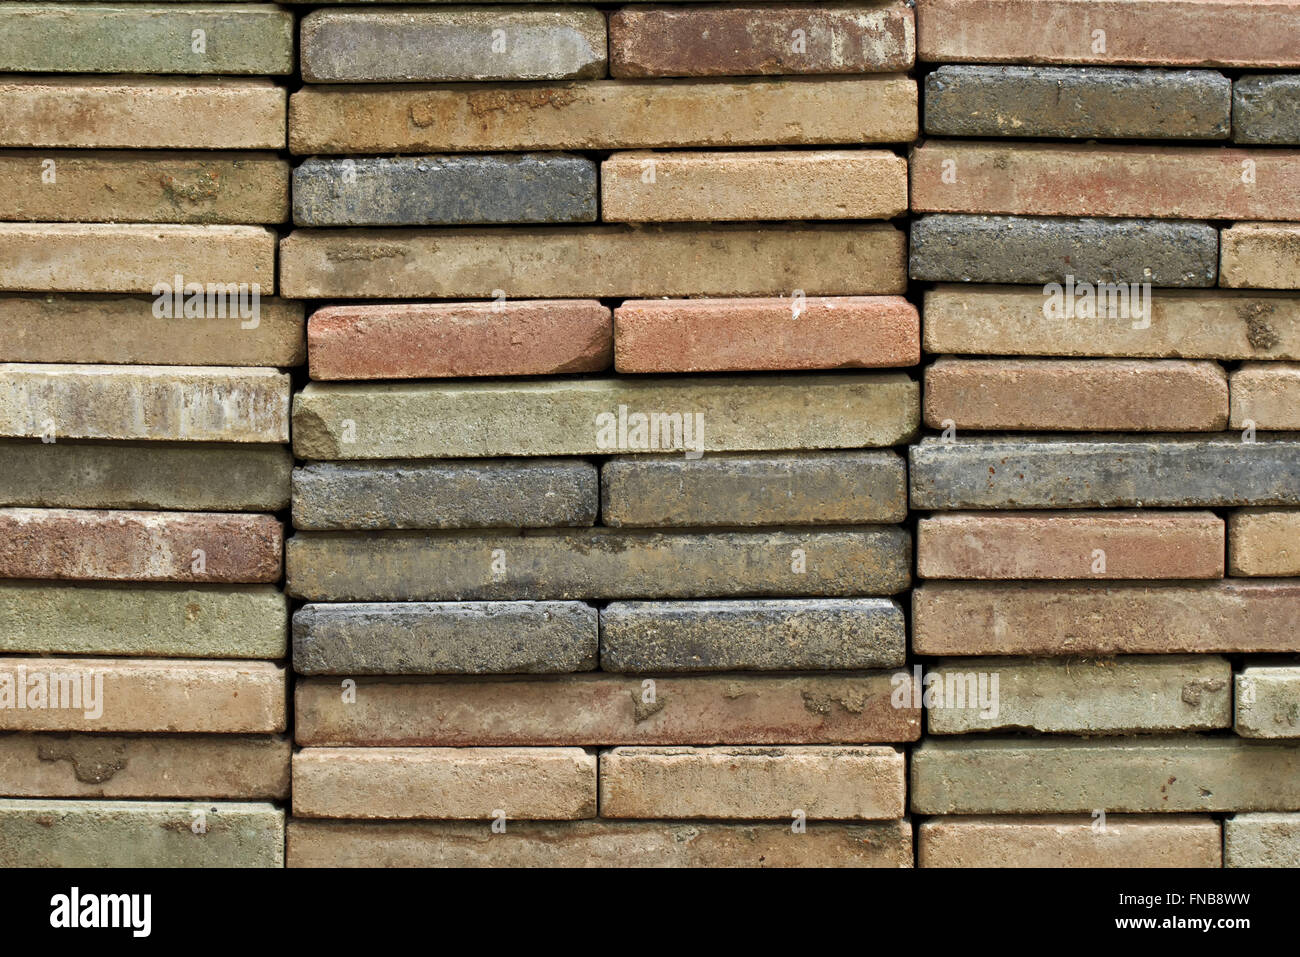 stacked old red brick Stock Photo